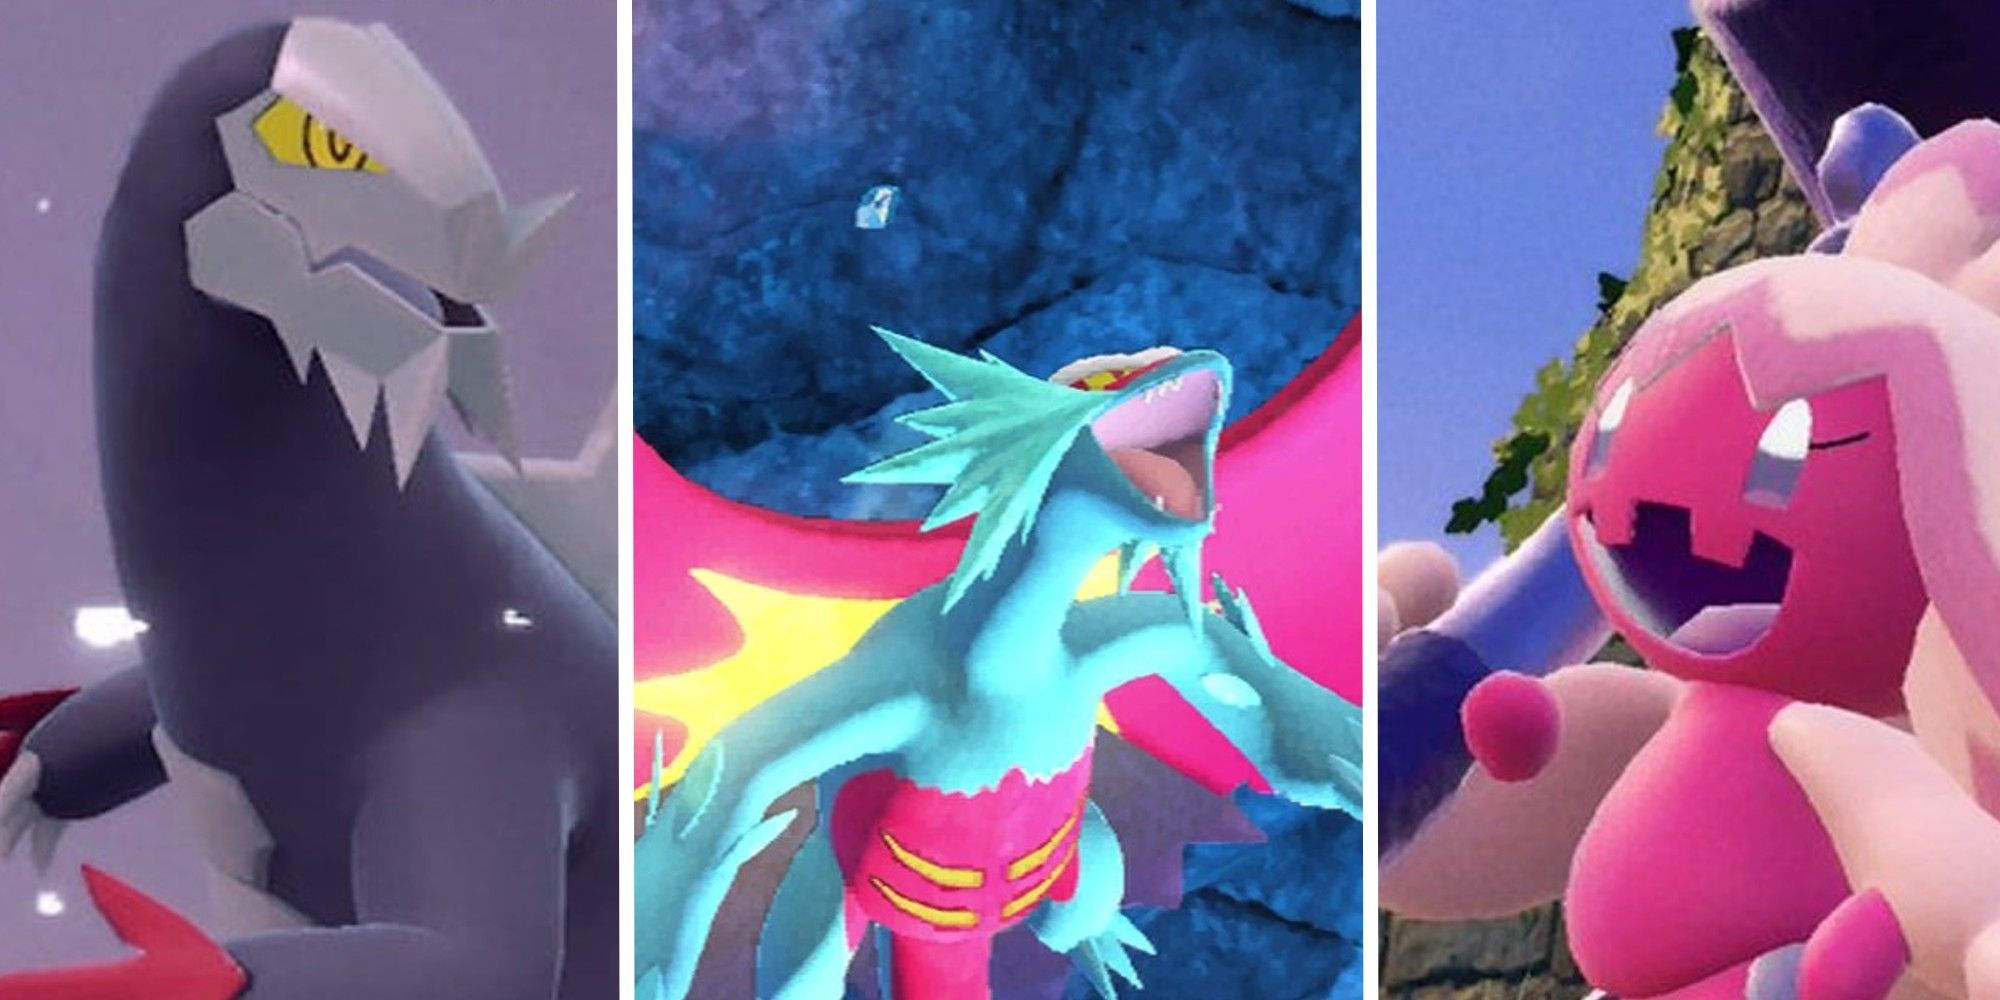 Pokemon Scarlet or Violet: Which has the best exclusive Pokemon